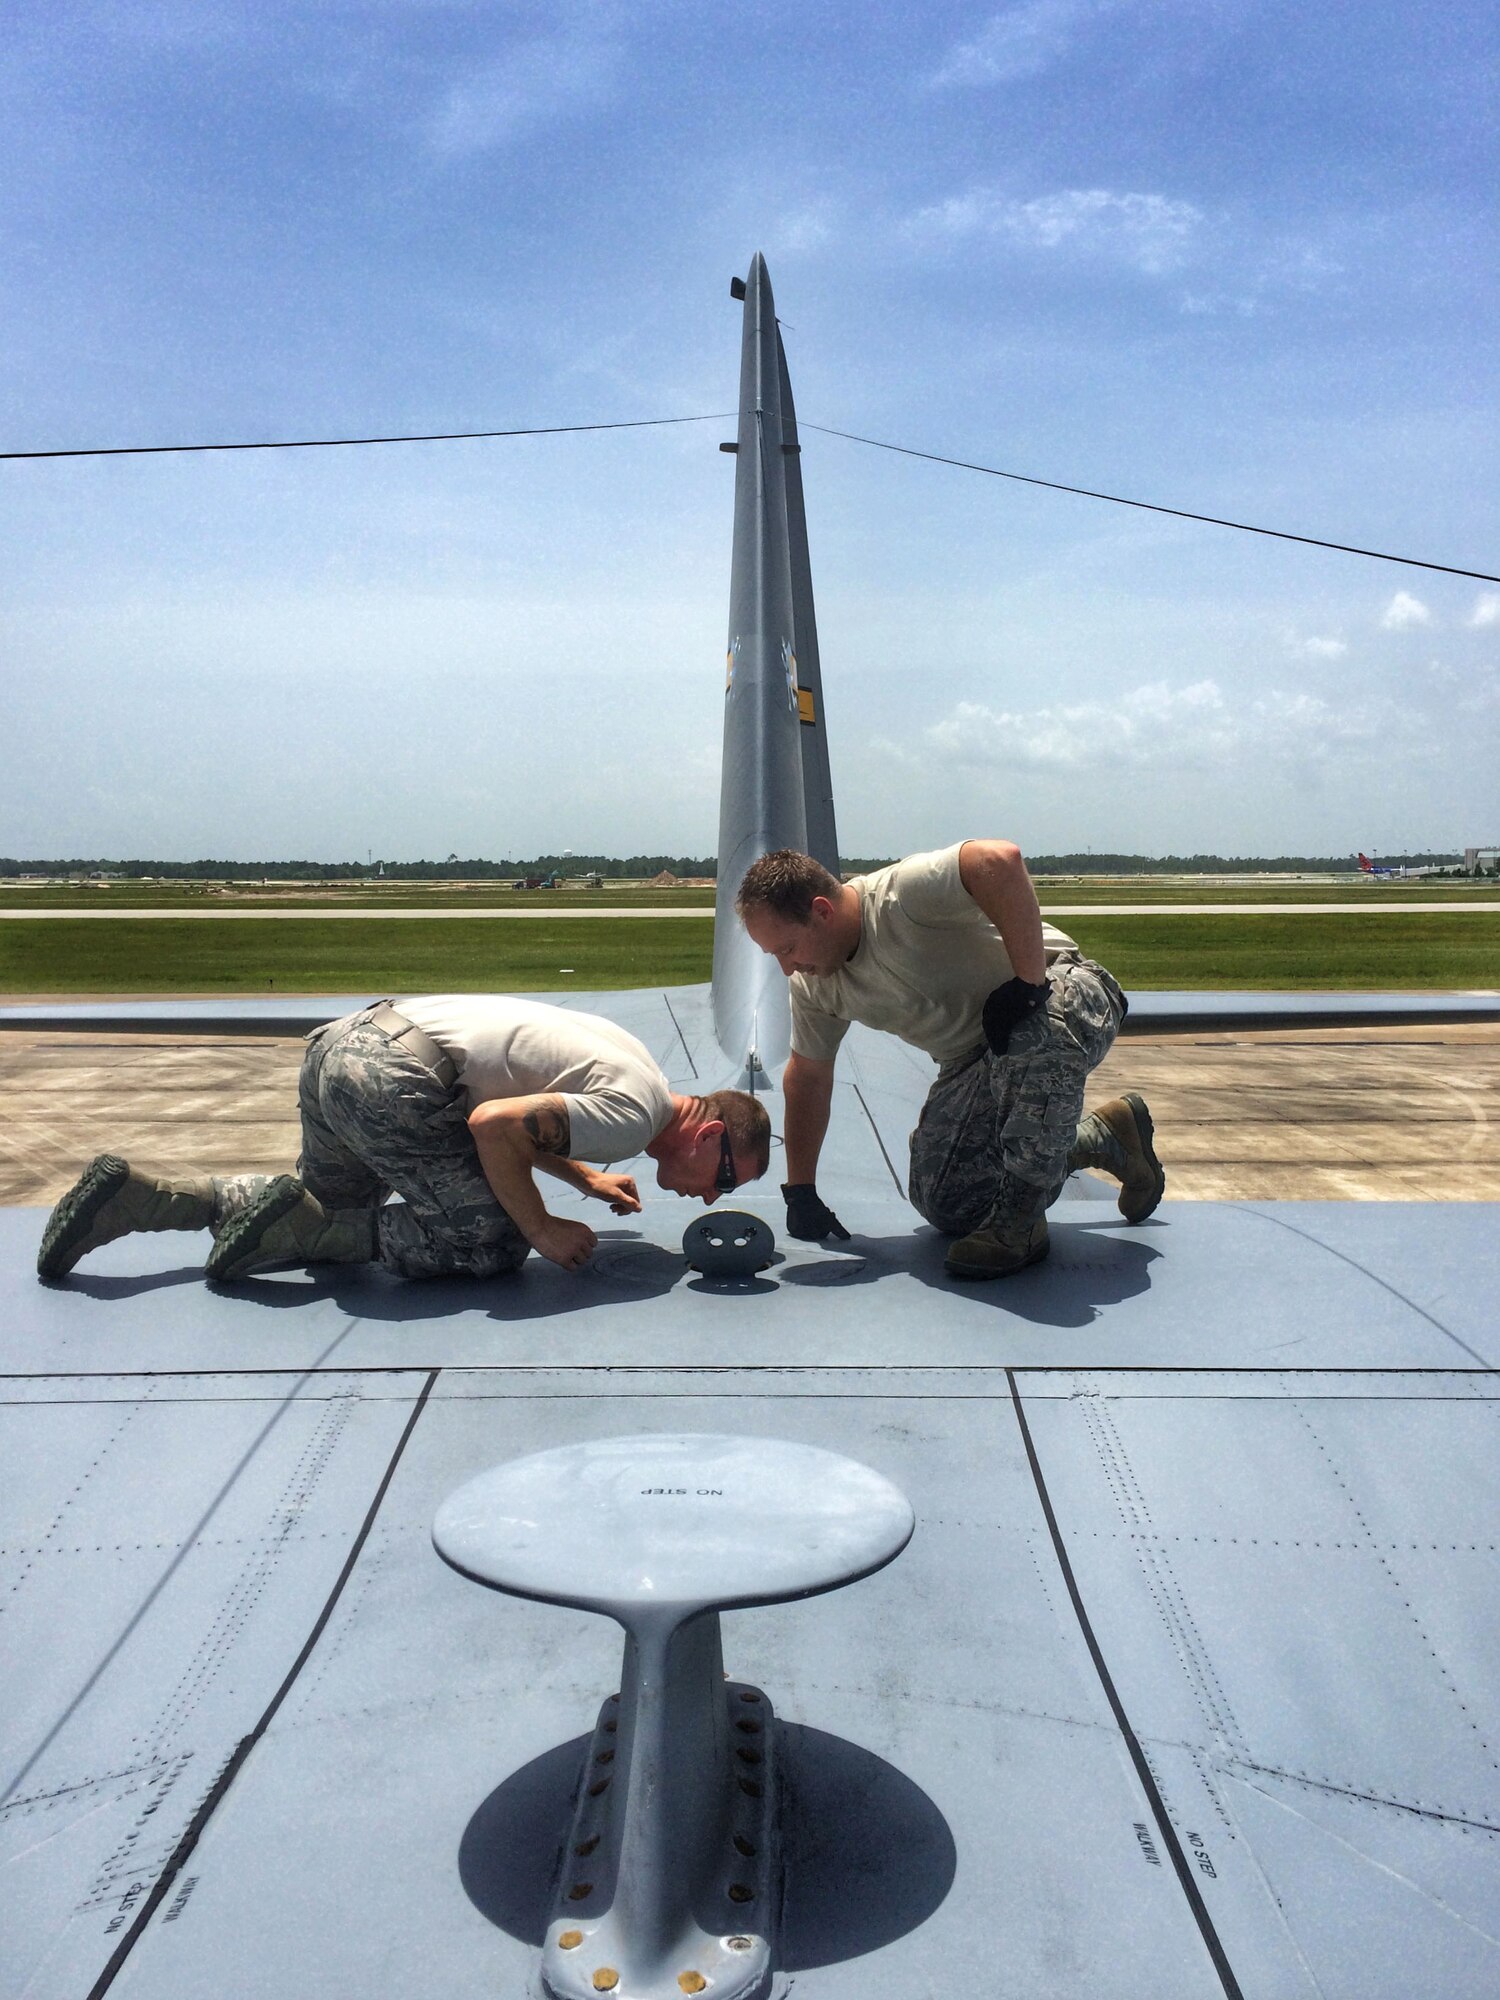 Senior Airman Kyle Murkowicz (left) and Tech. Sgt. Paul Rozum, both with the 103rd Airlift Wing Maintenance Squadron, inspect a center dry bay as part of a basic post flight inspection on a C-130H Hercules at the Combat Readiness Training Center, Gulfport, Miss., June 24, 2014. Members of the 103rd maintenance squadron are receiving training for the C-130H in Gulfport. (U.S. Air National Guard photo by Senior Airman Jennifer Pierce)